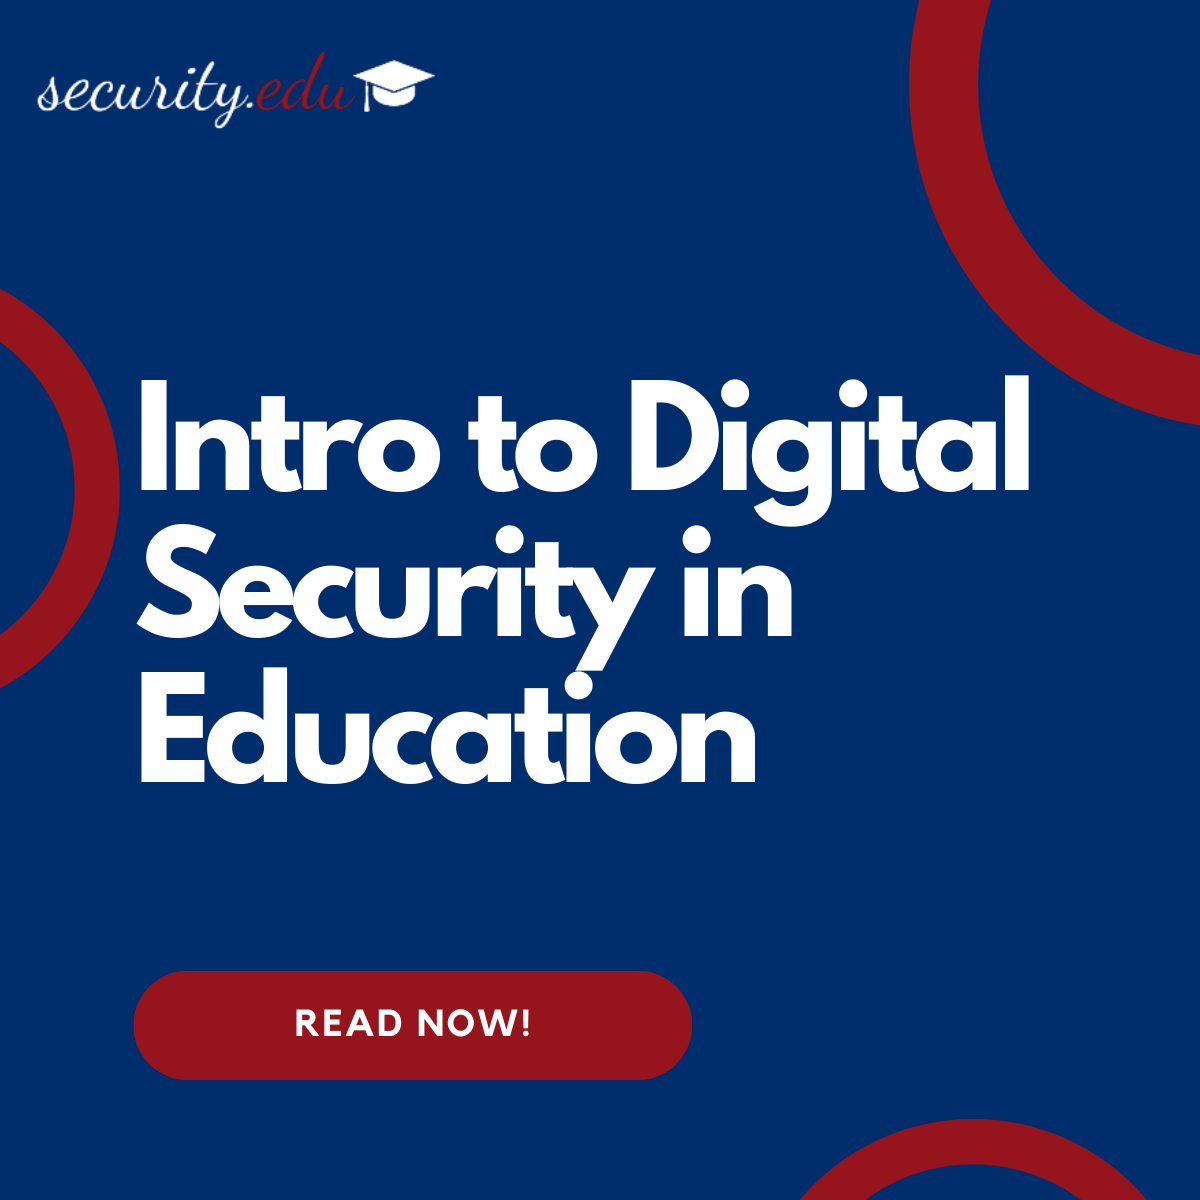 Introduction to Digital Security in Education